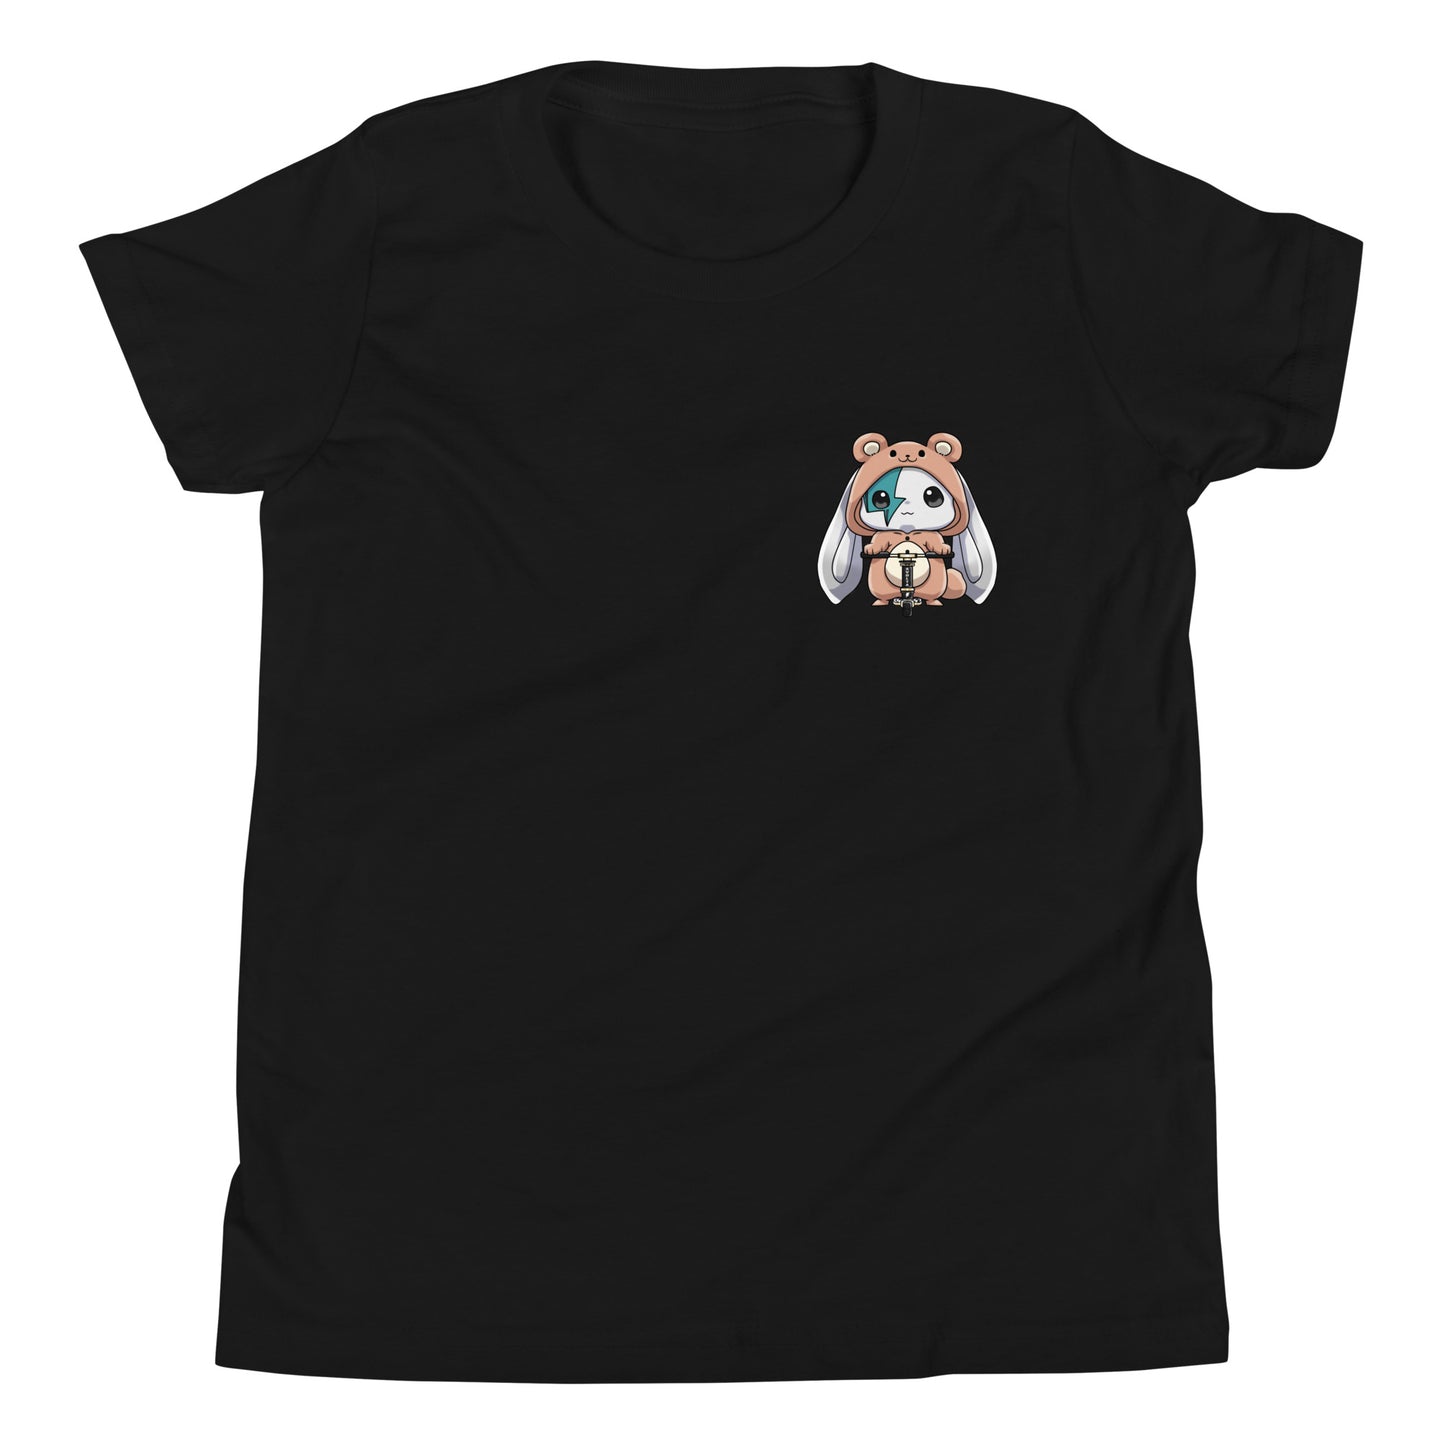 SVOLTA *$18 Deal* Bunny T-shirt in Black, S-XL - Kids/Youth, Multiple Styles